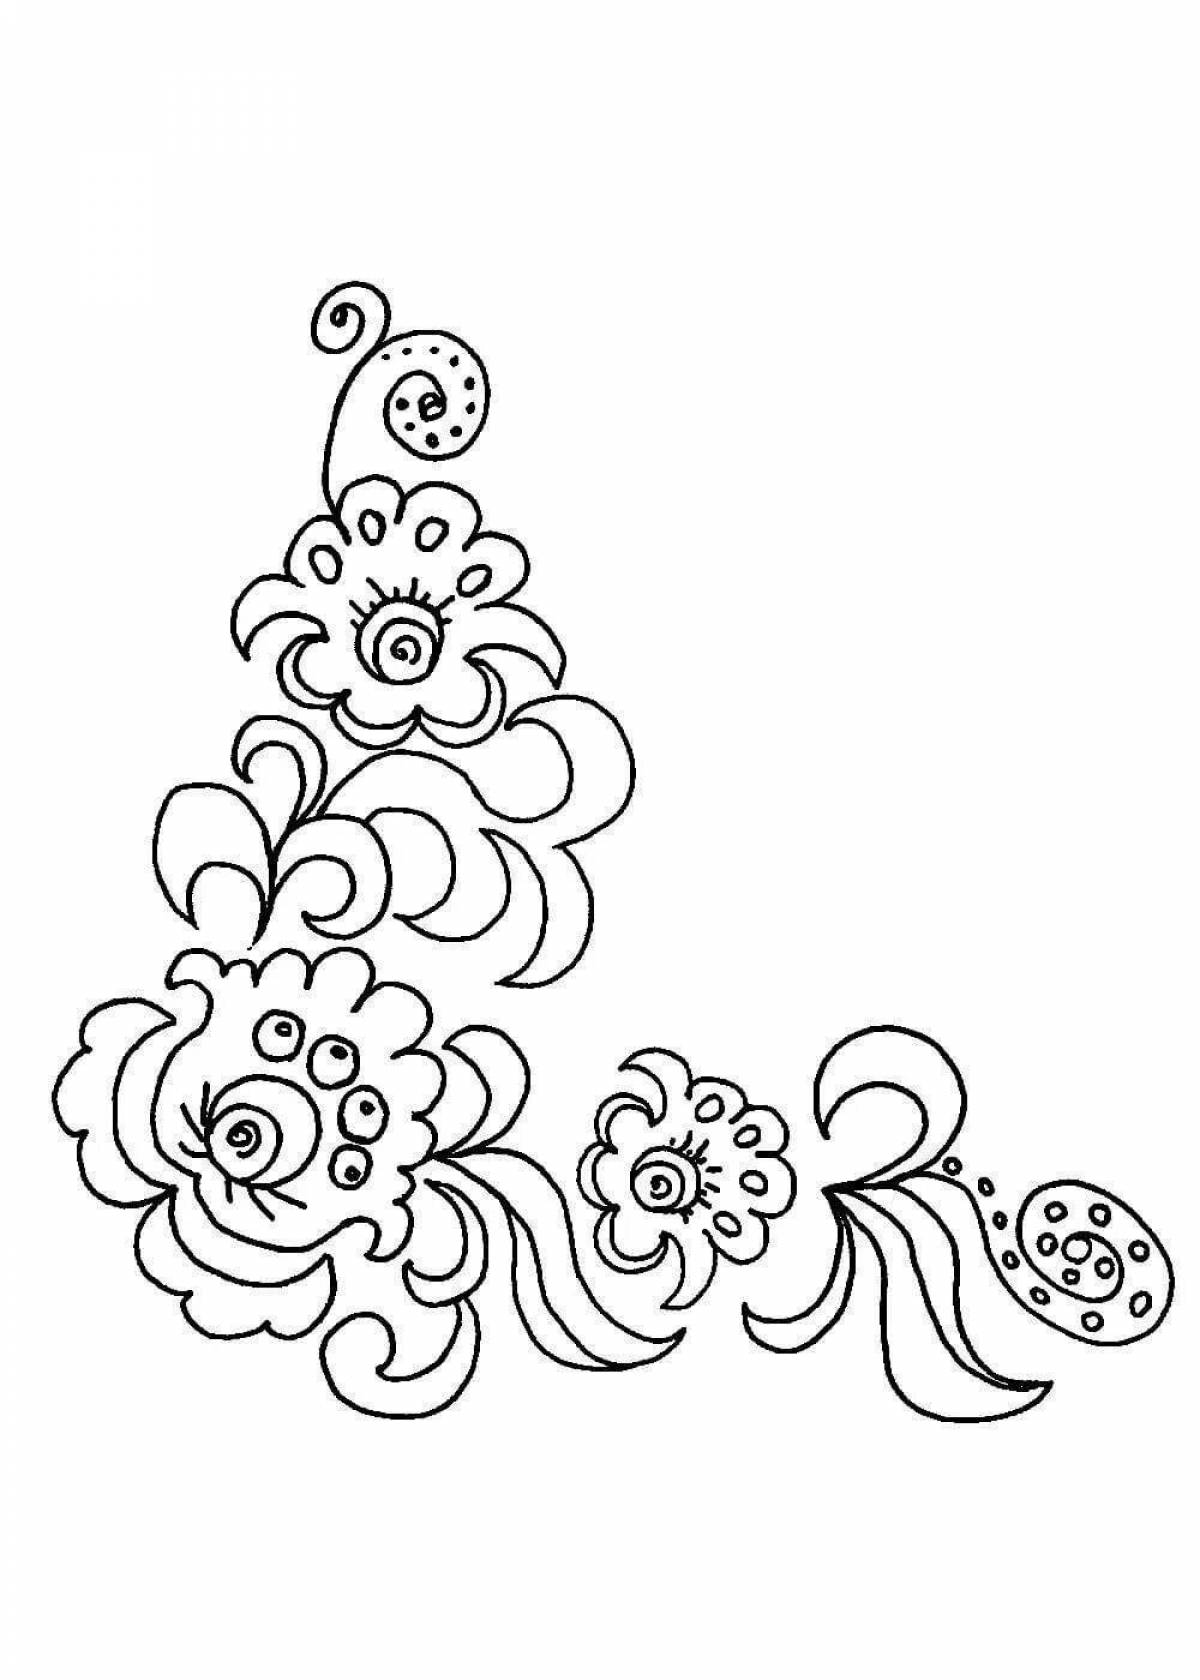 Coloring page delightful gzhel patterns